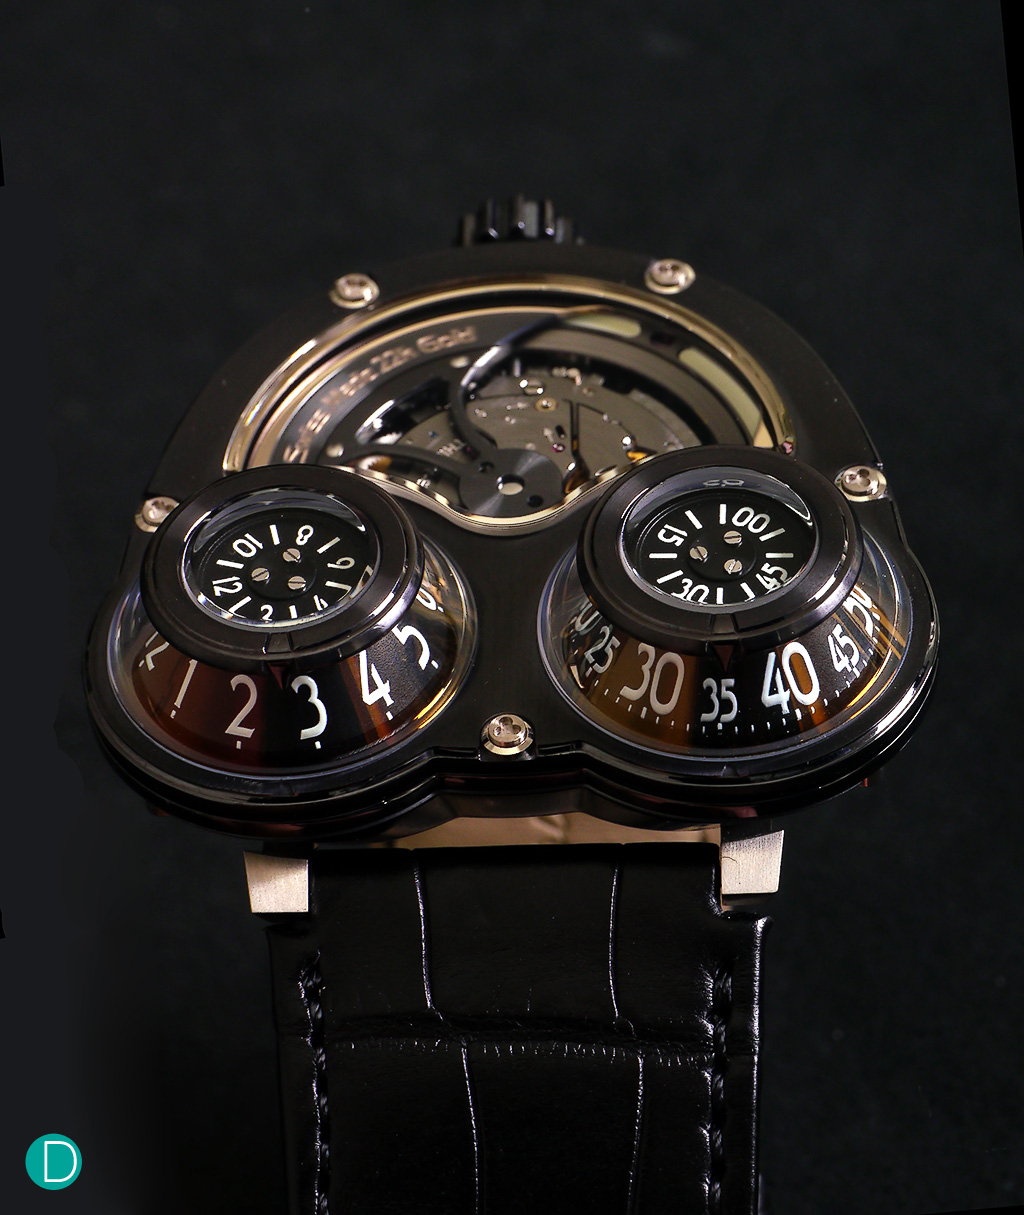 The MB&F Megawind Final Edition.